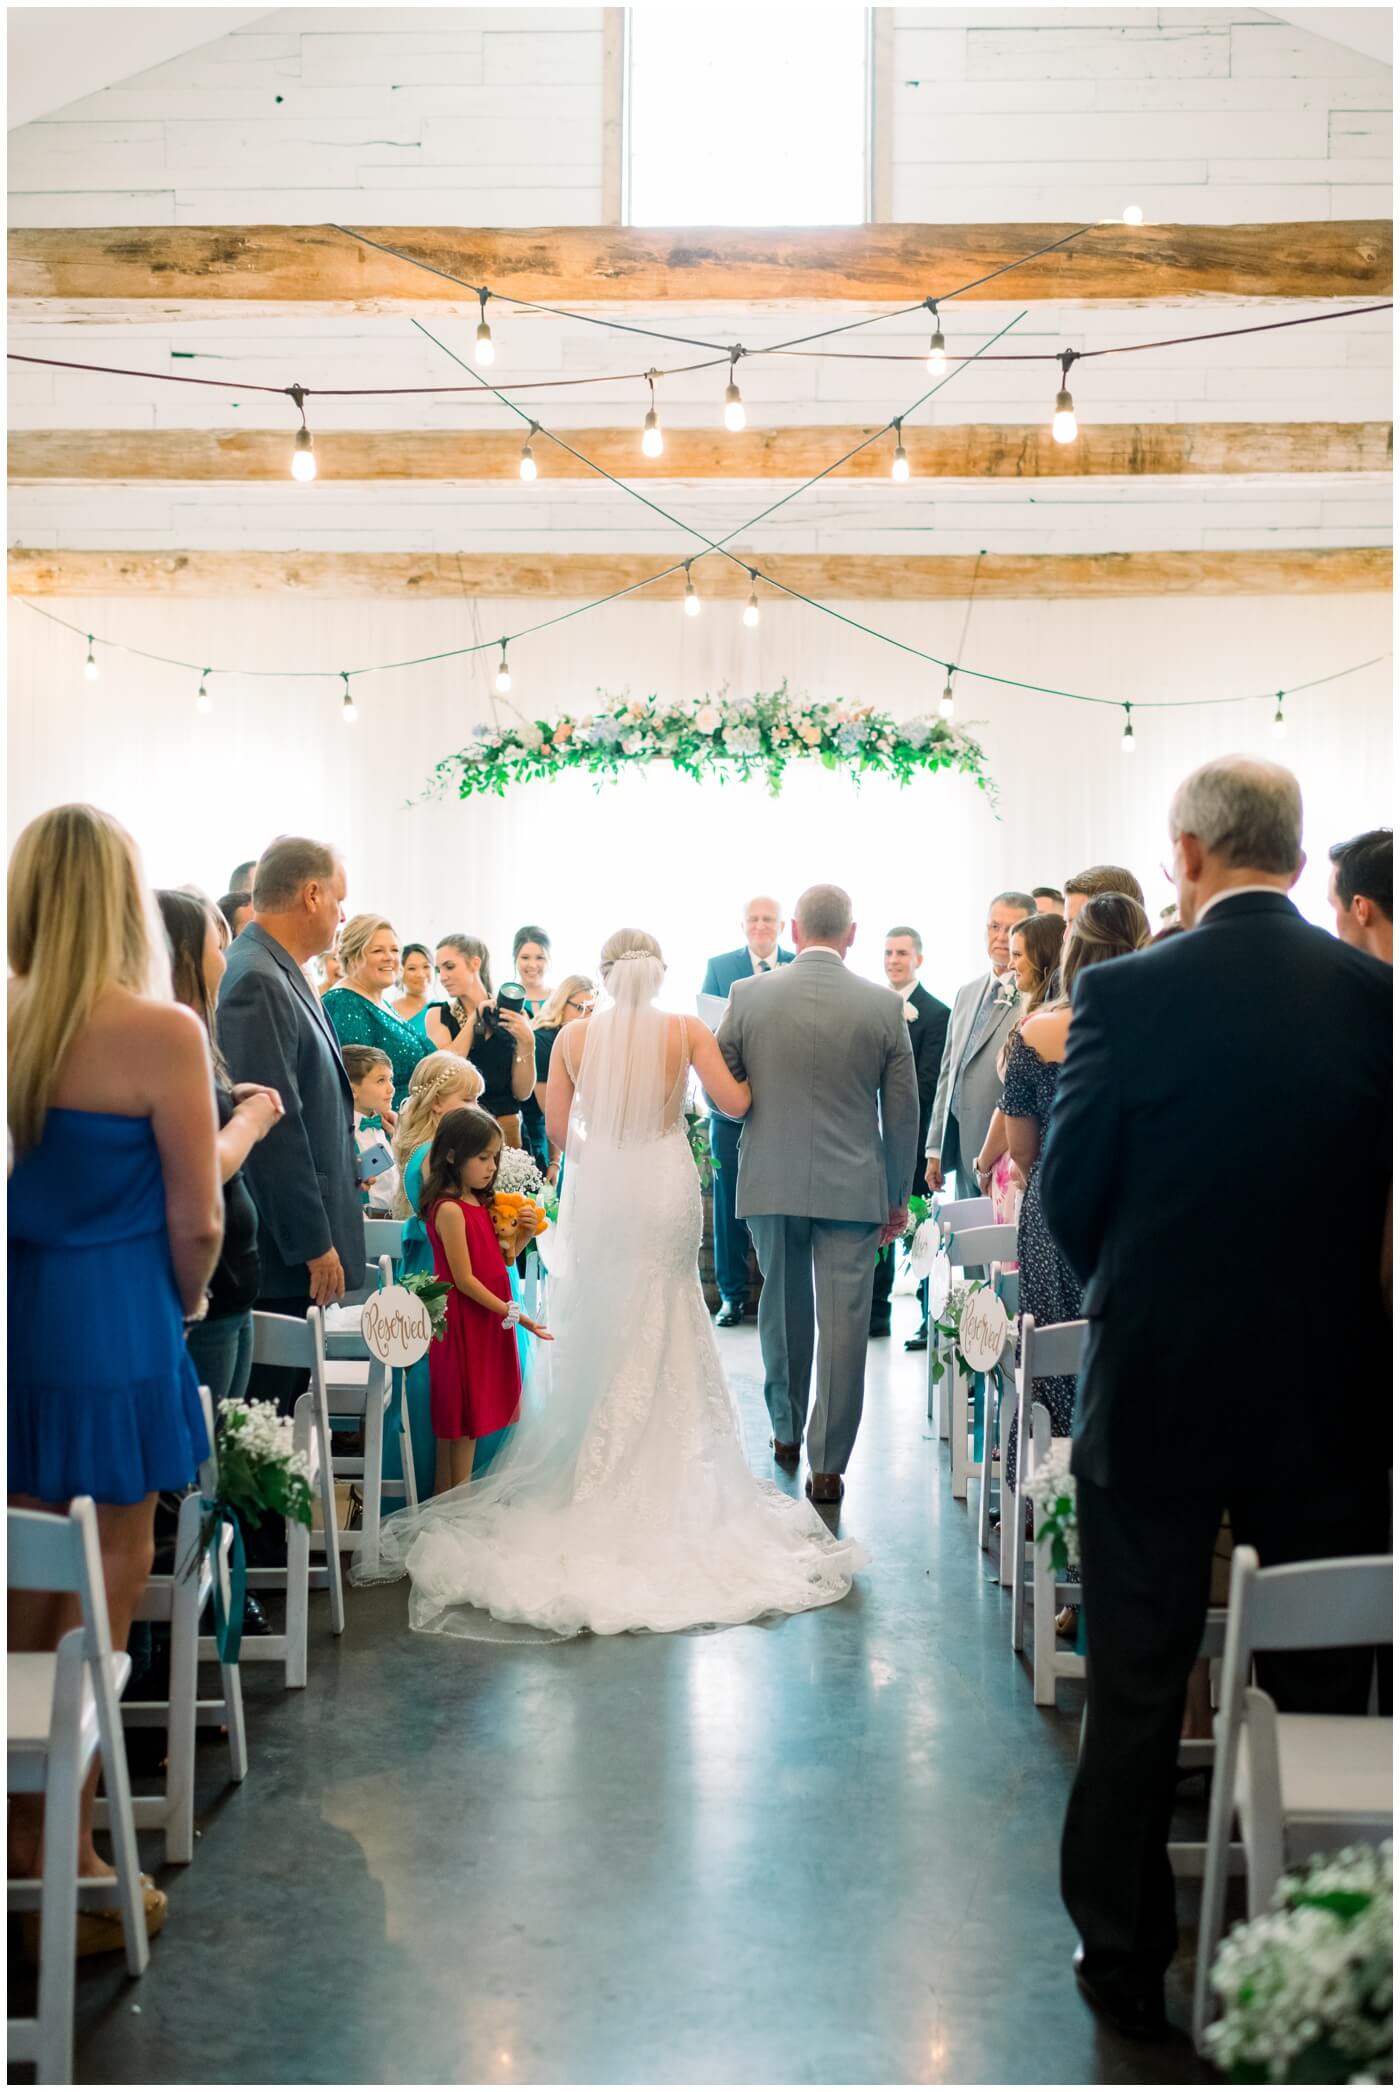 Beckendorff Farms | The bride walks down the aisle with her father 